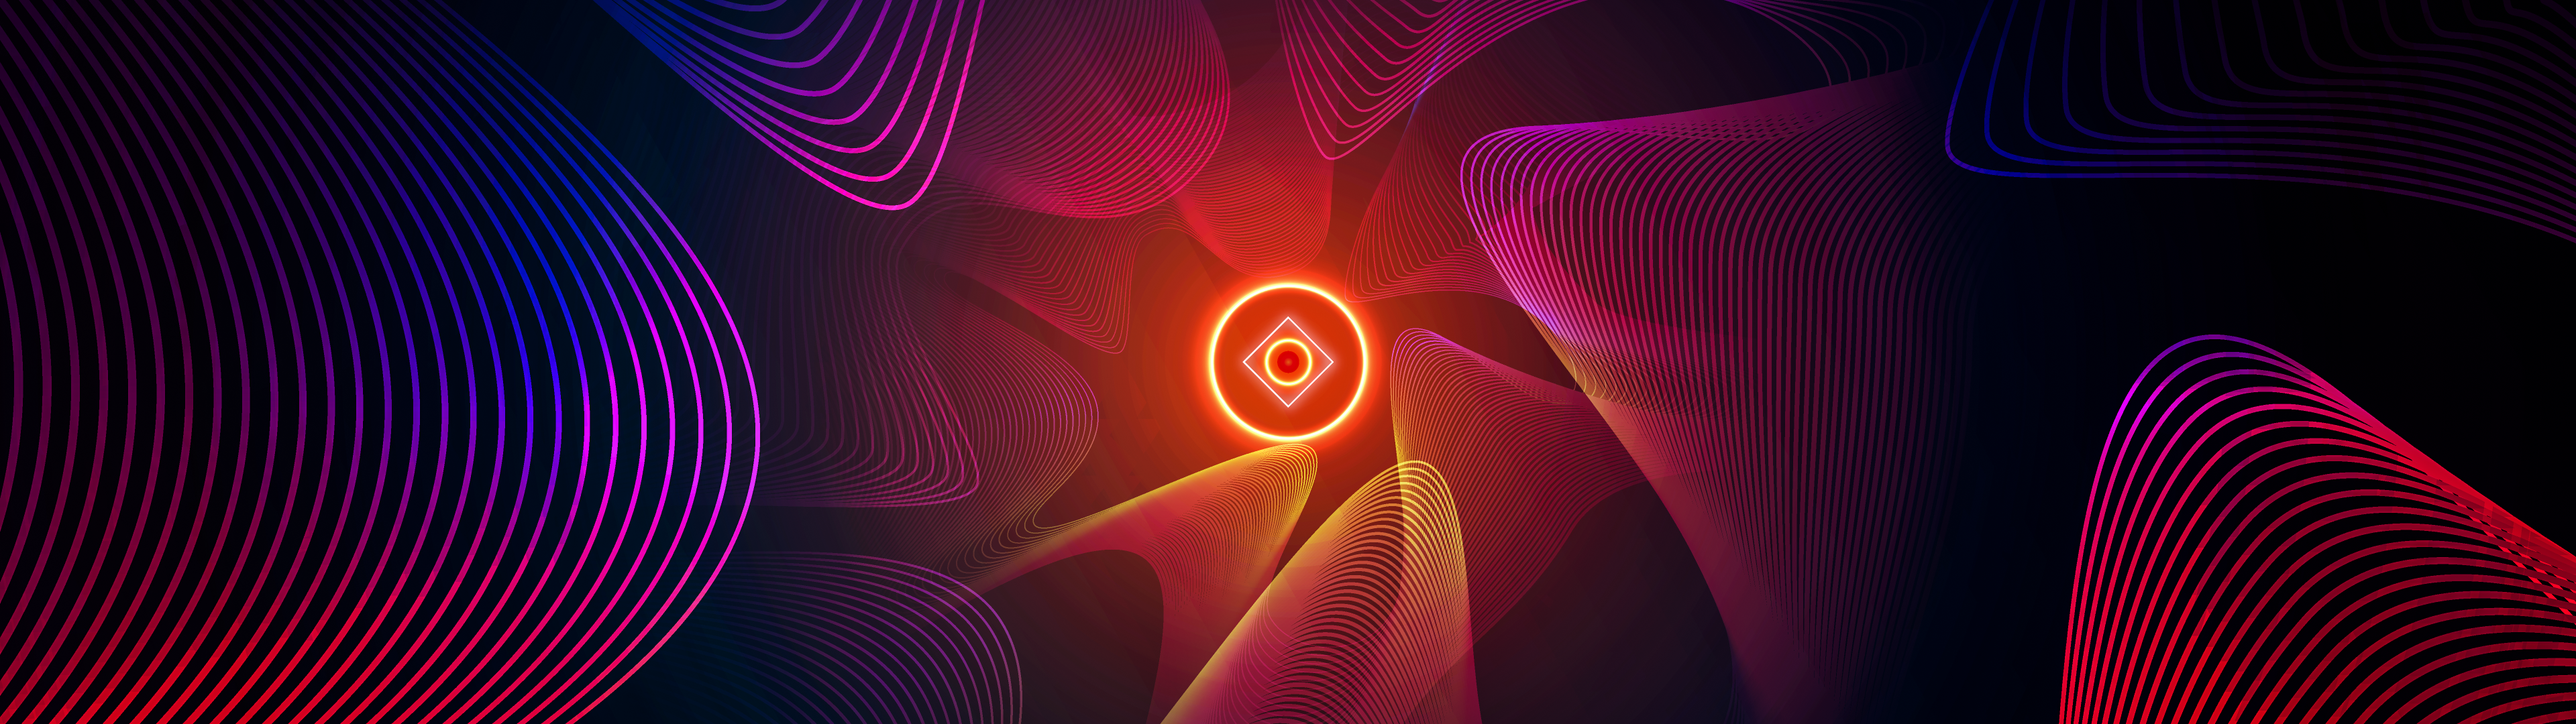 Abstract background Wallpaper 4K, Glowing, Shapes, Waves, #10058